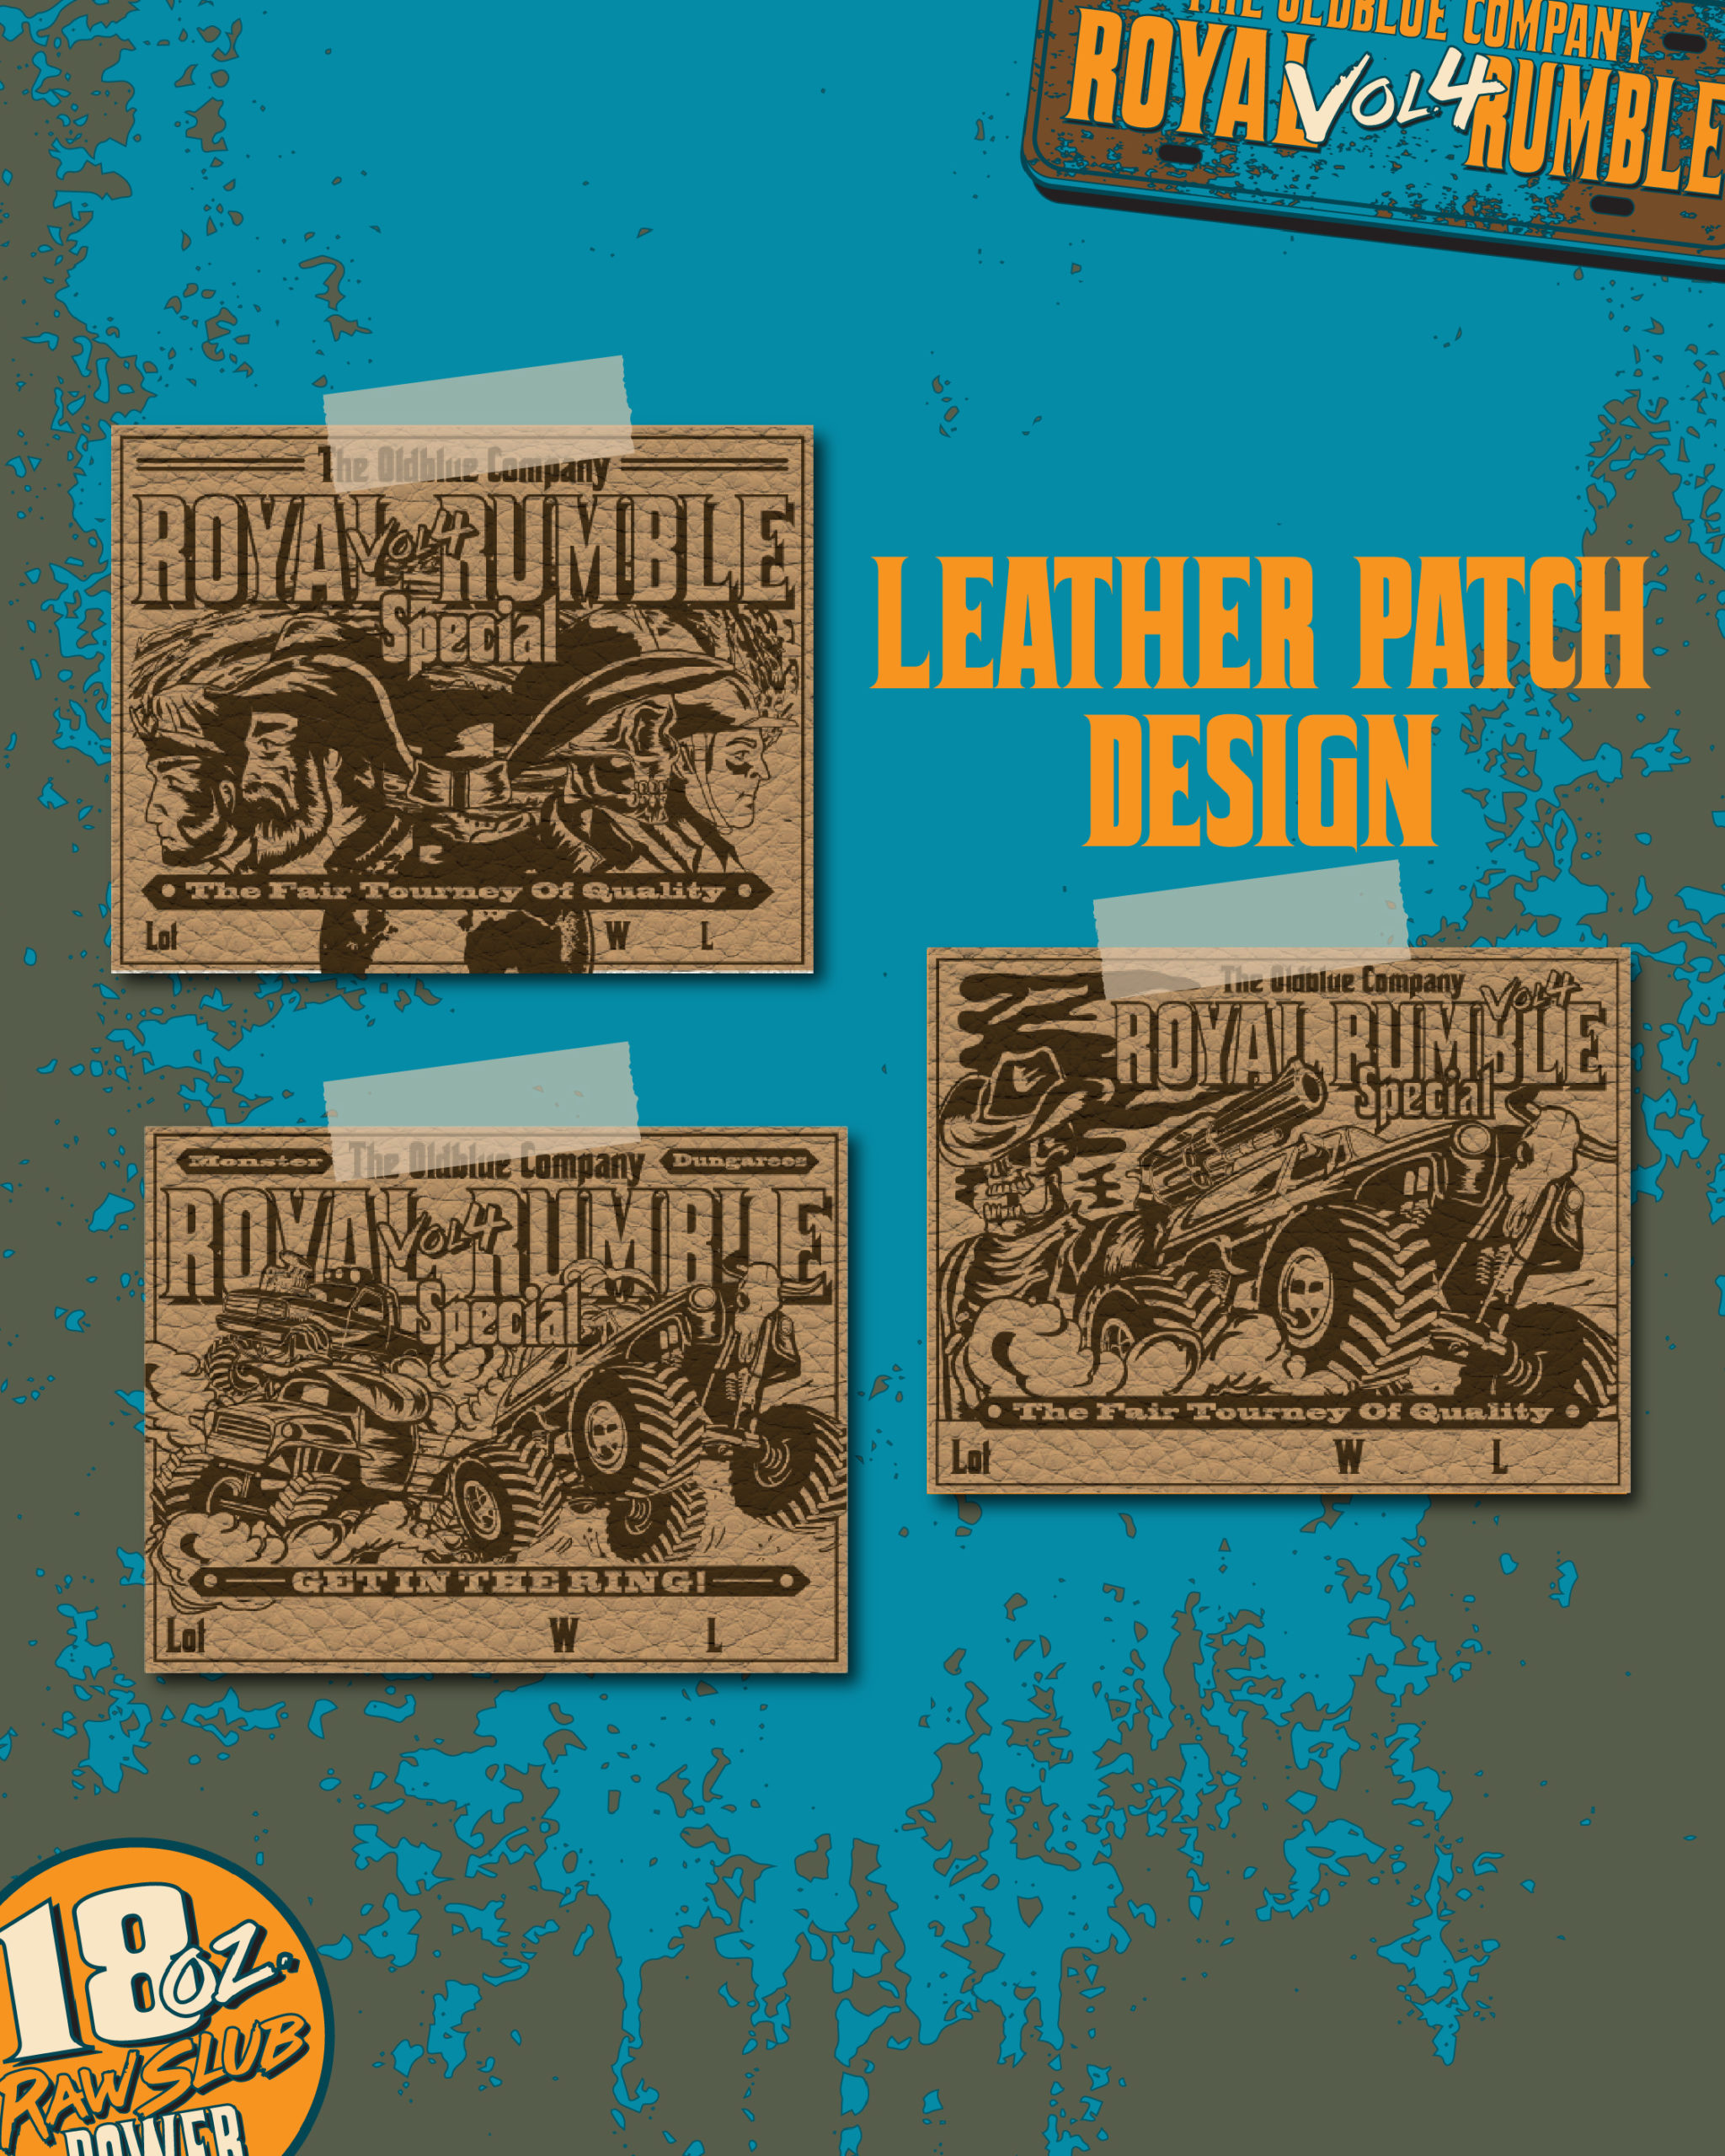 THE LEATHER PATCH DESIGN